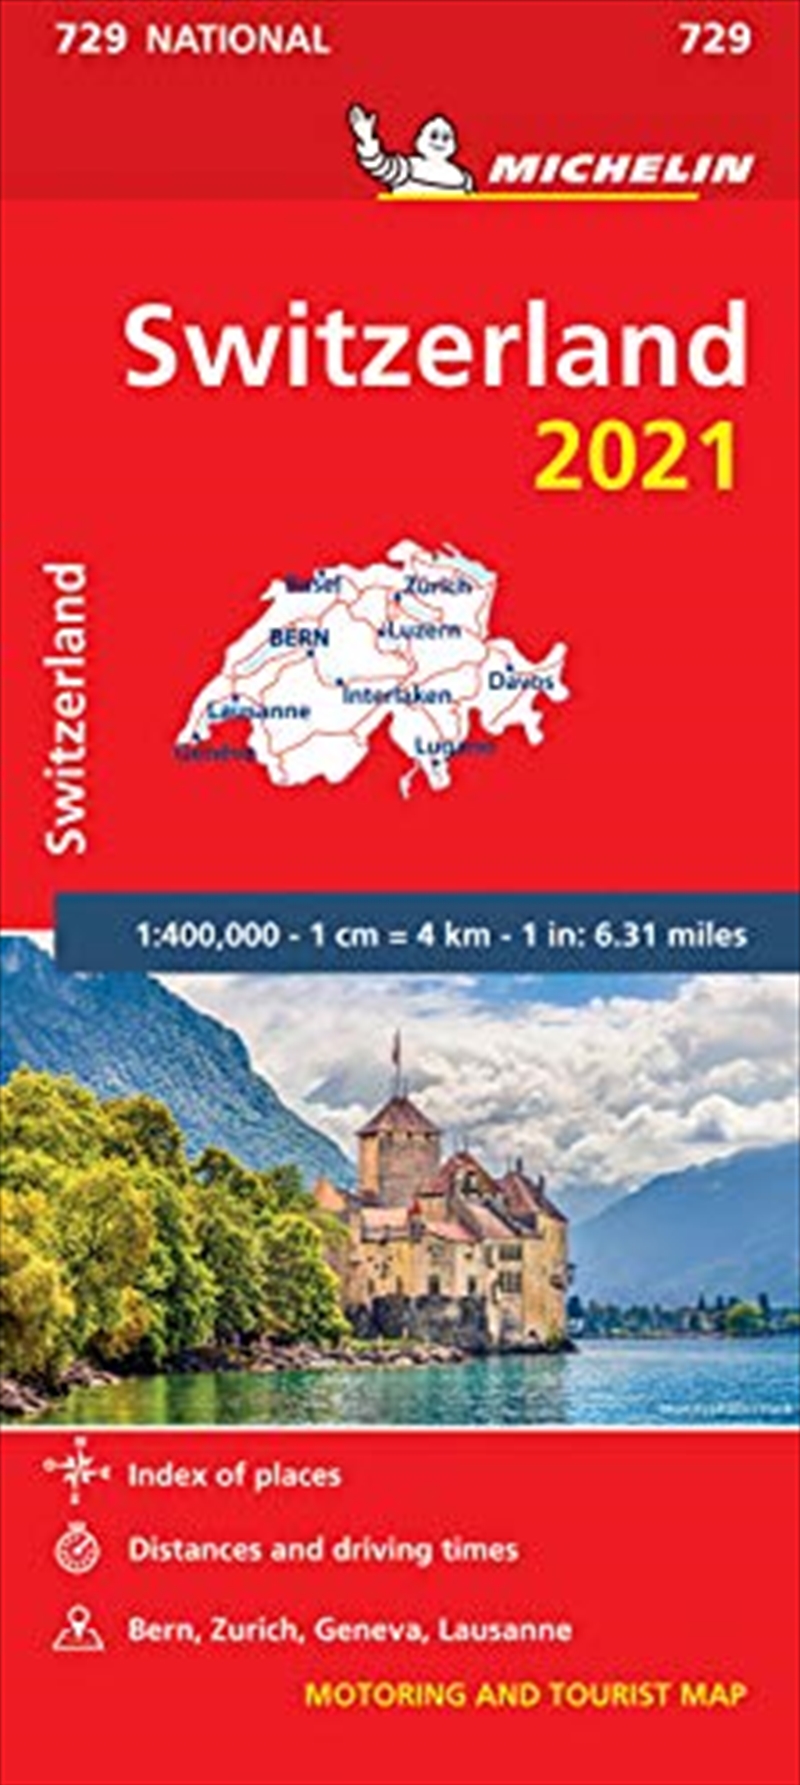 Switzerland 2021 - Michelin National Map 729: Maps (Michelin National Maps)/Product Detail/Recipes, Food & Drink